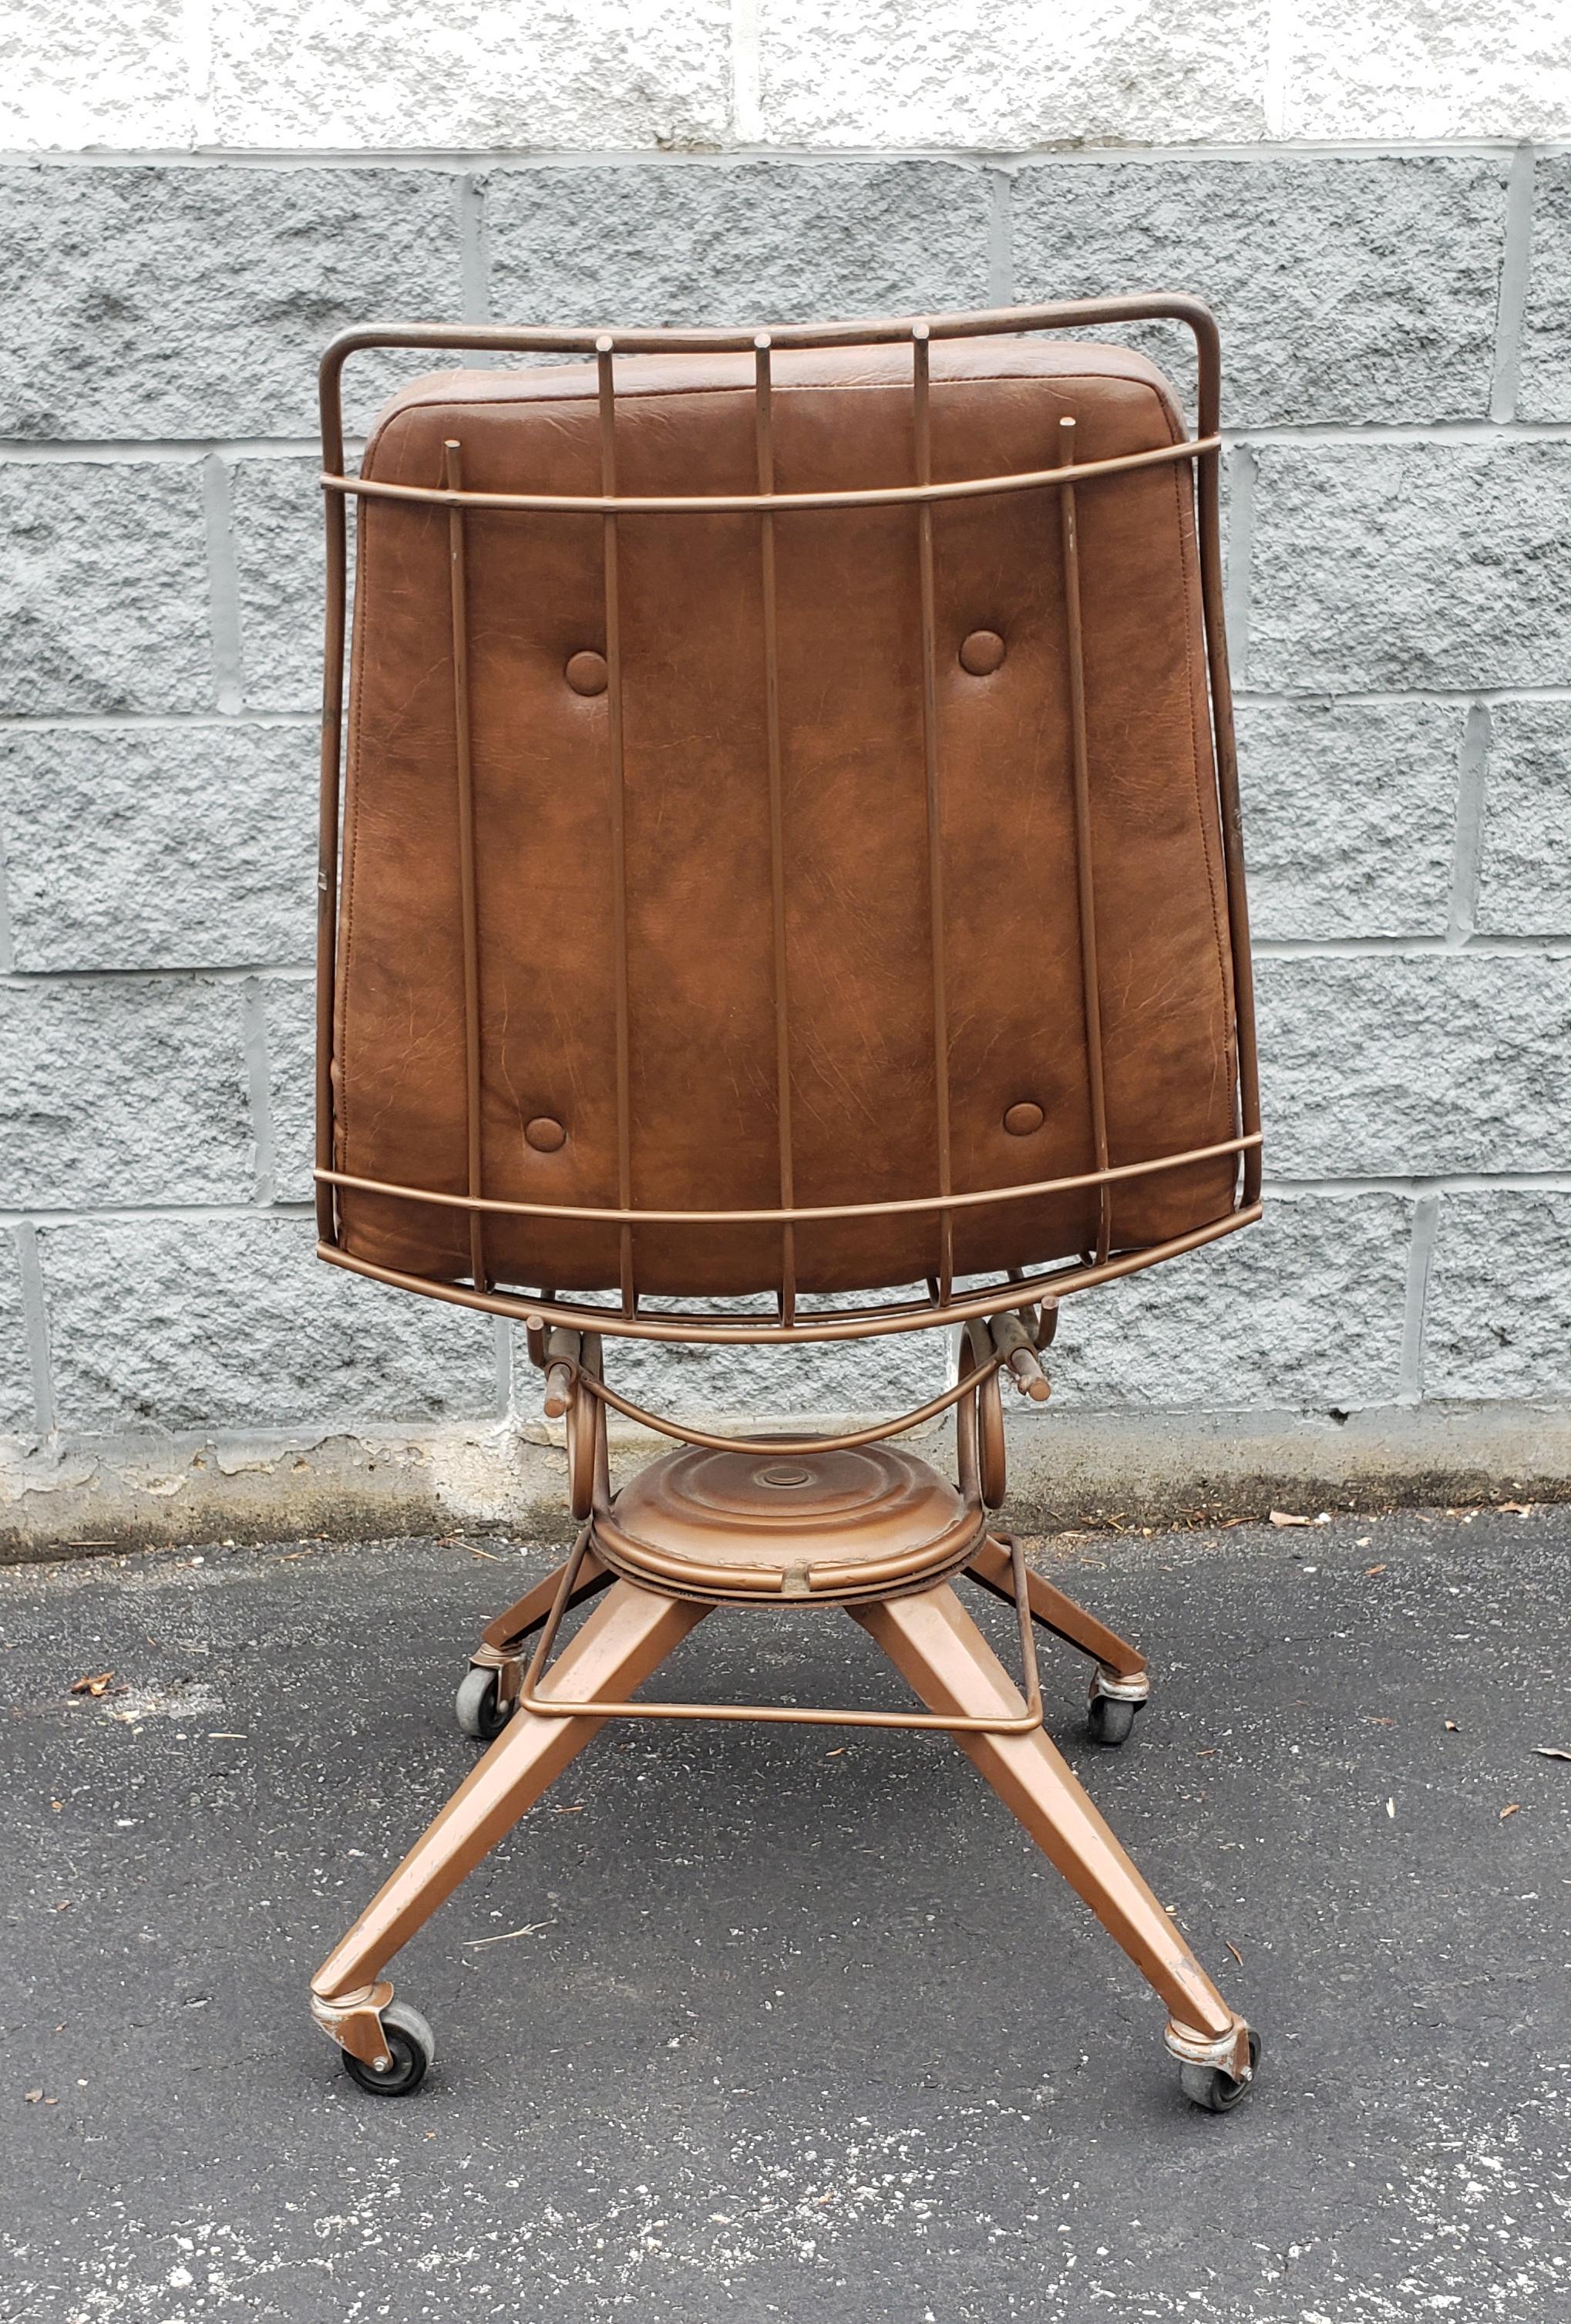 Midcentury Office Chair with Tufted Seat and Back In Good Condition For Sale In Germantown, MD